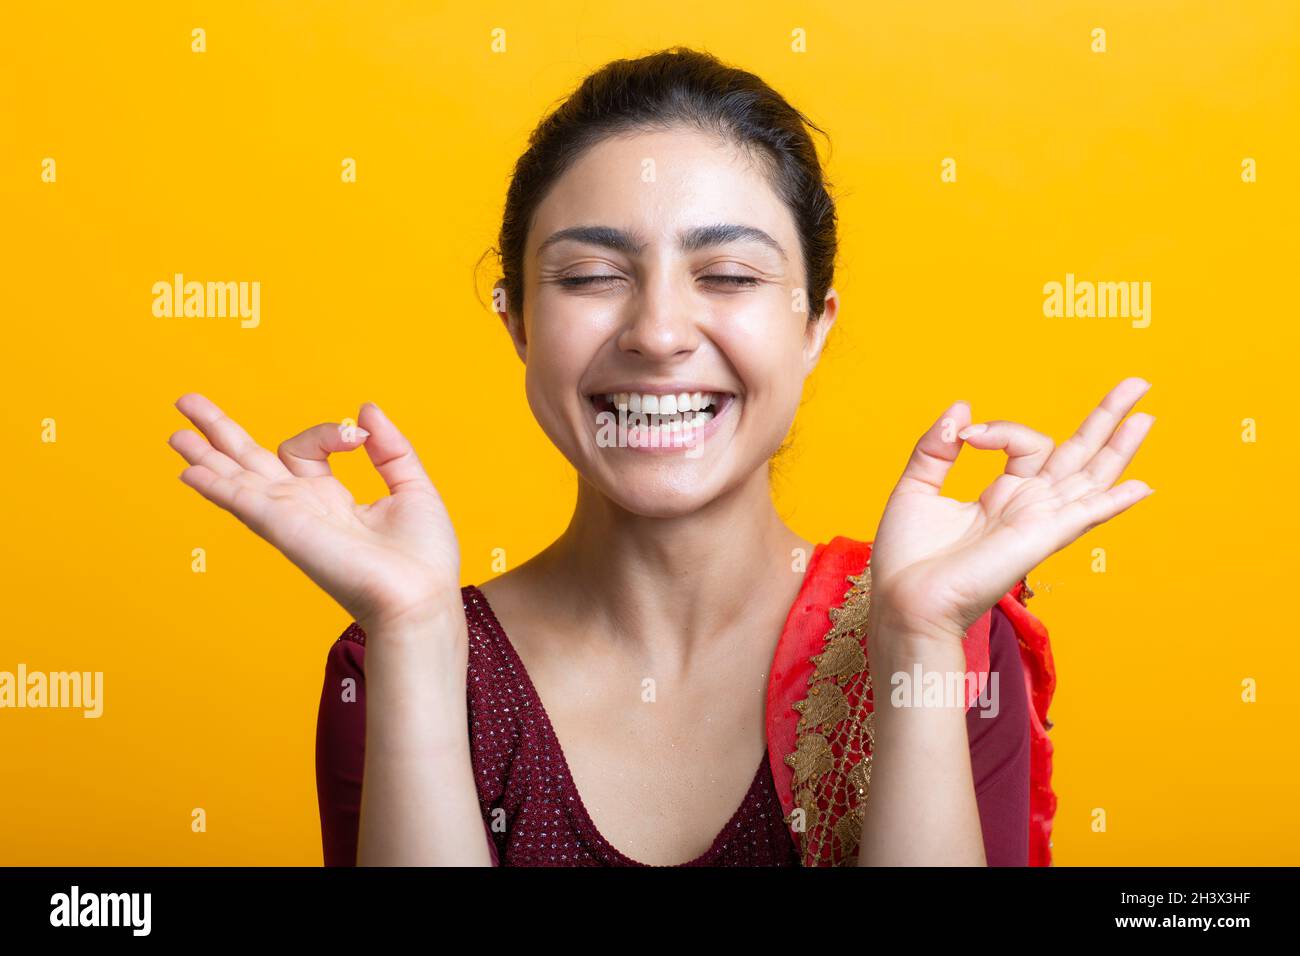 Portrait of young adult indian woman in sari meditating zen like with ok sign mudra gesture Stock Photo